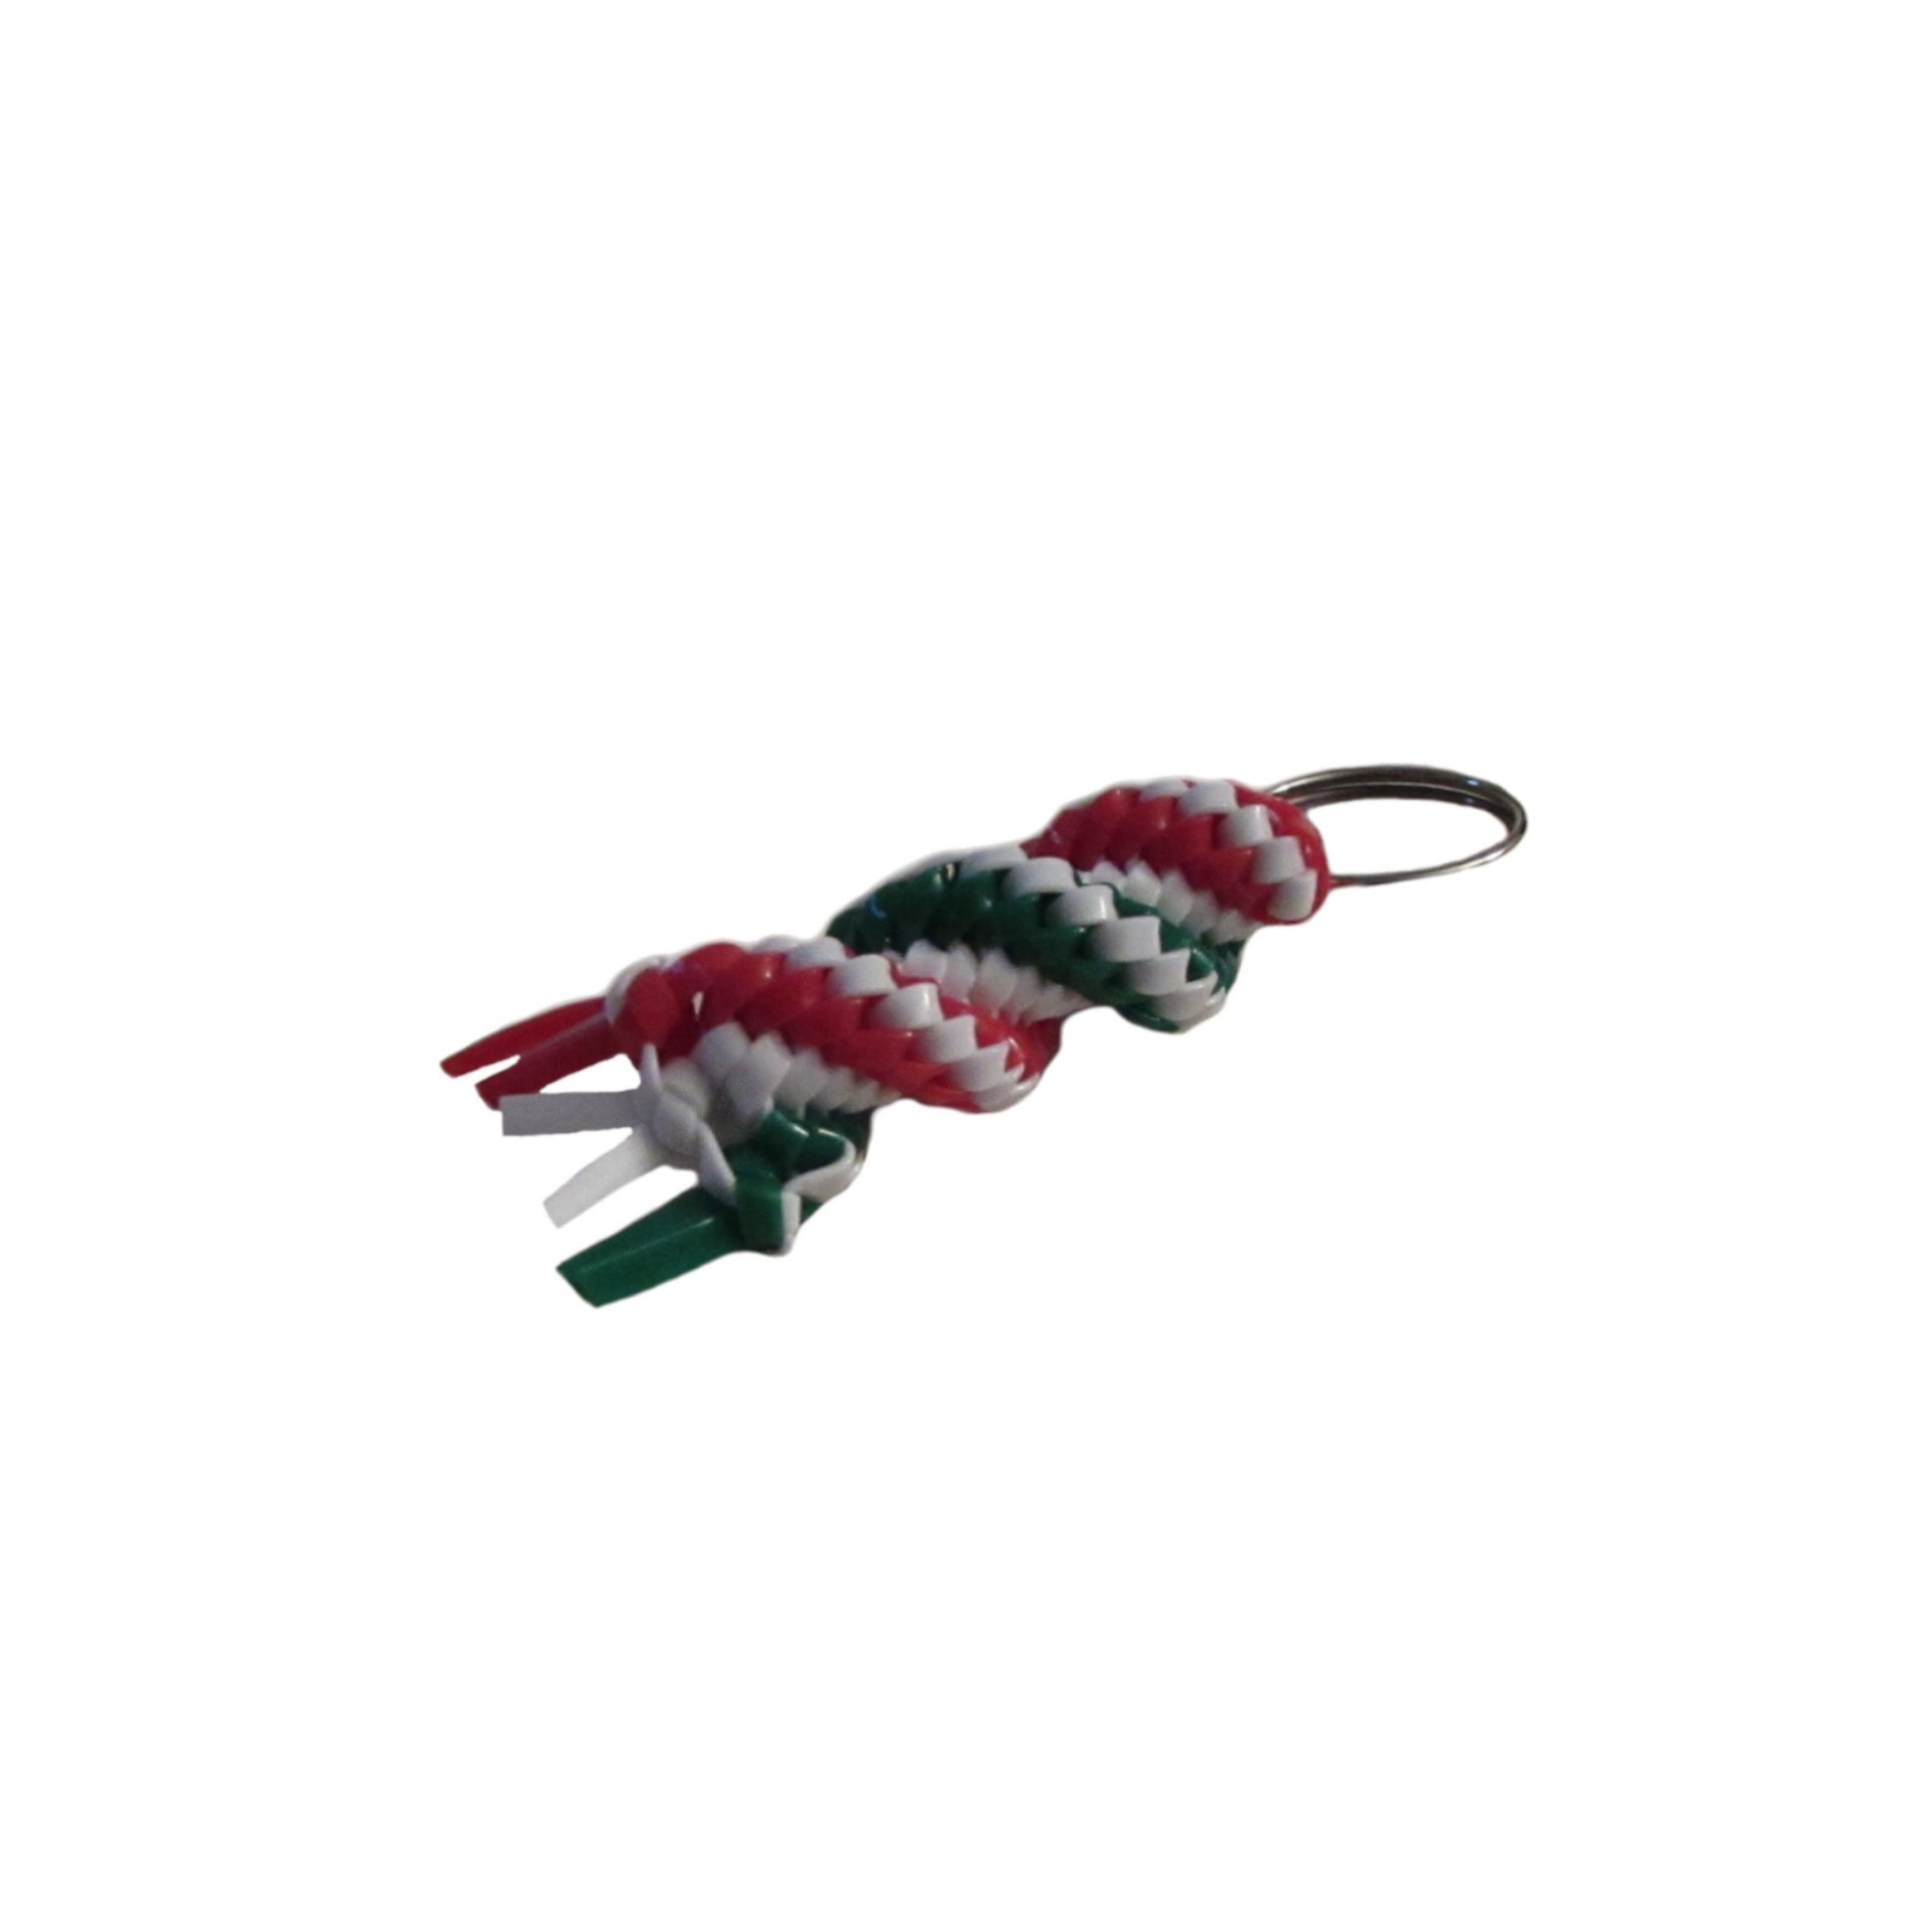 Red, Green, and White Plastic Lacing Key Chain Right view